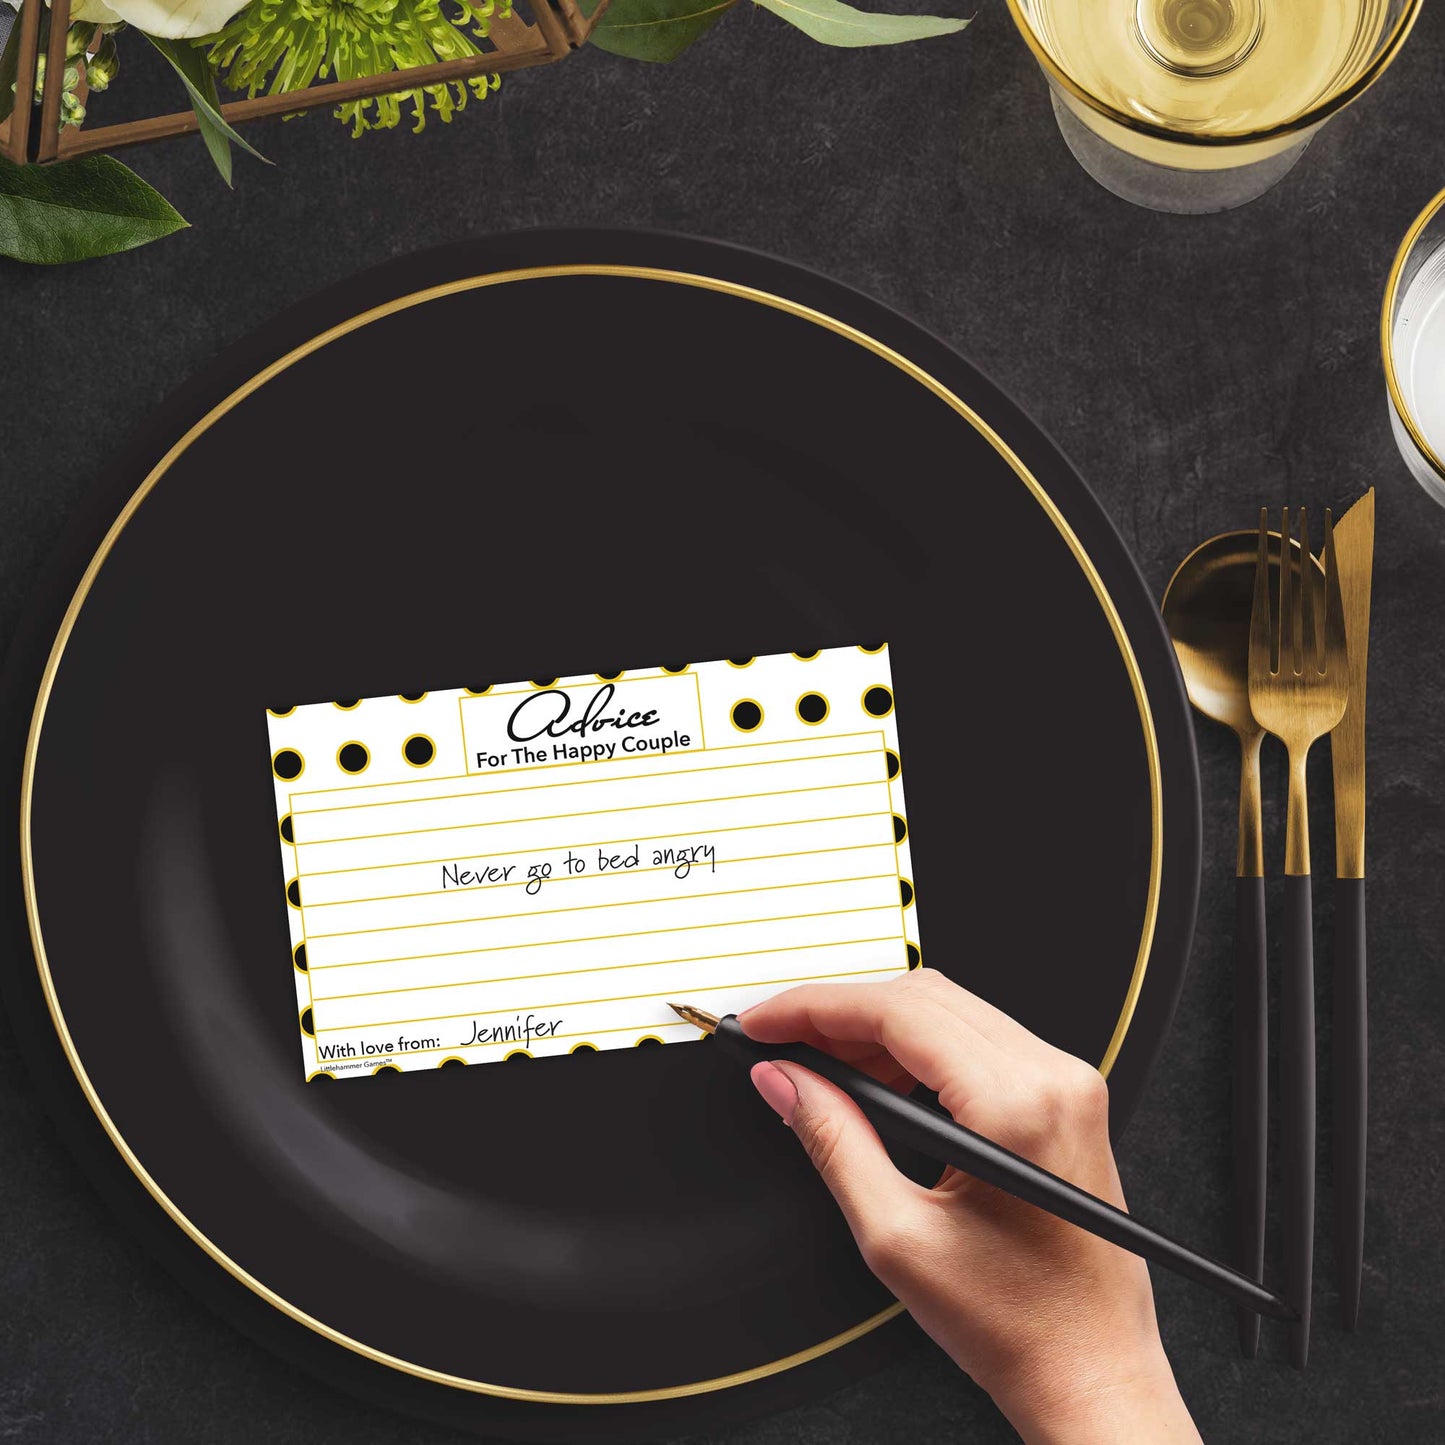 Woman with a pen sitting at a dark place setting with a black and gold plate filling out a black and gold polka dot Advice for the Happy Couple card